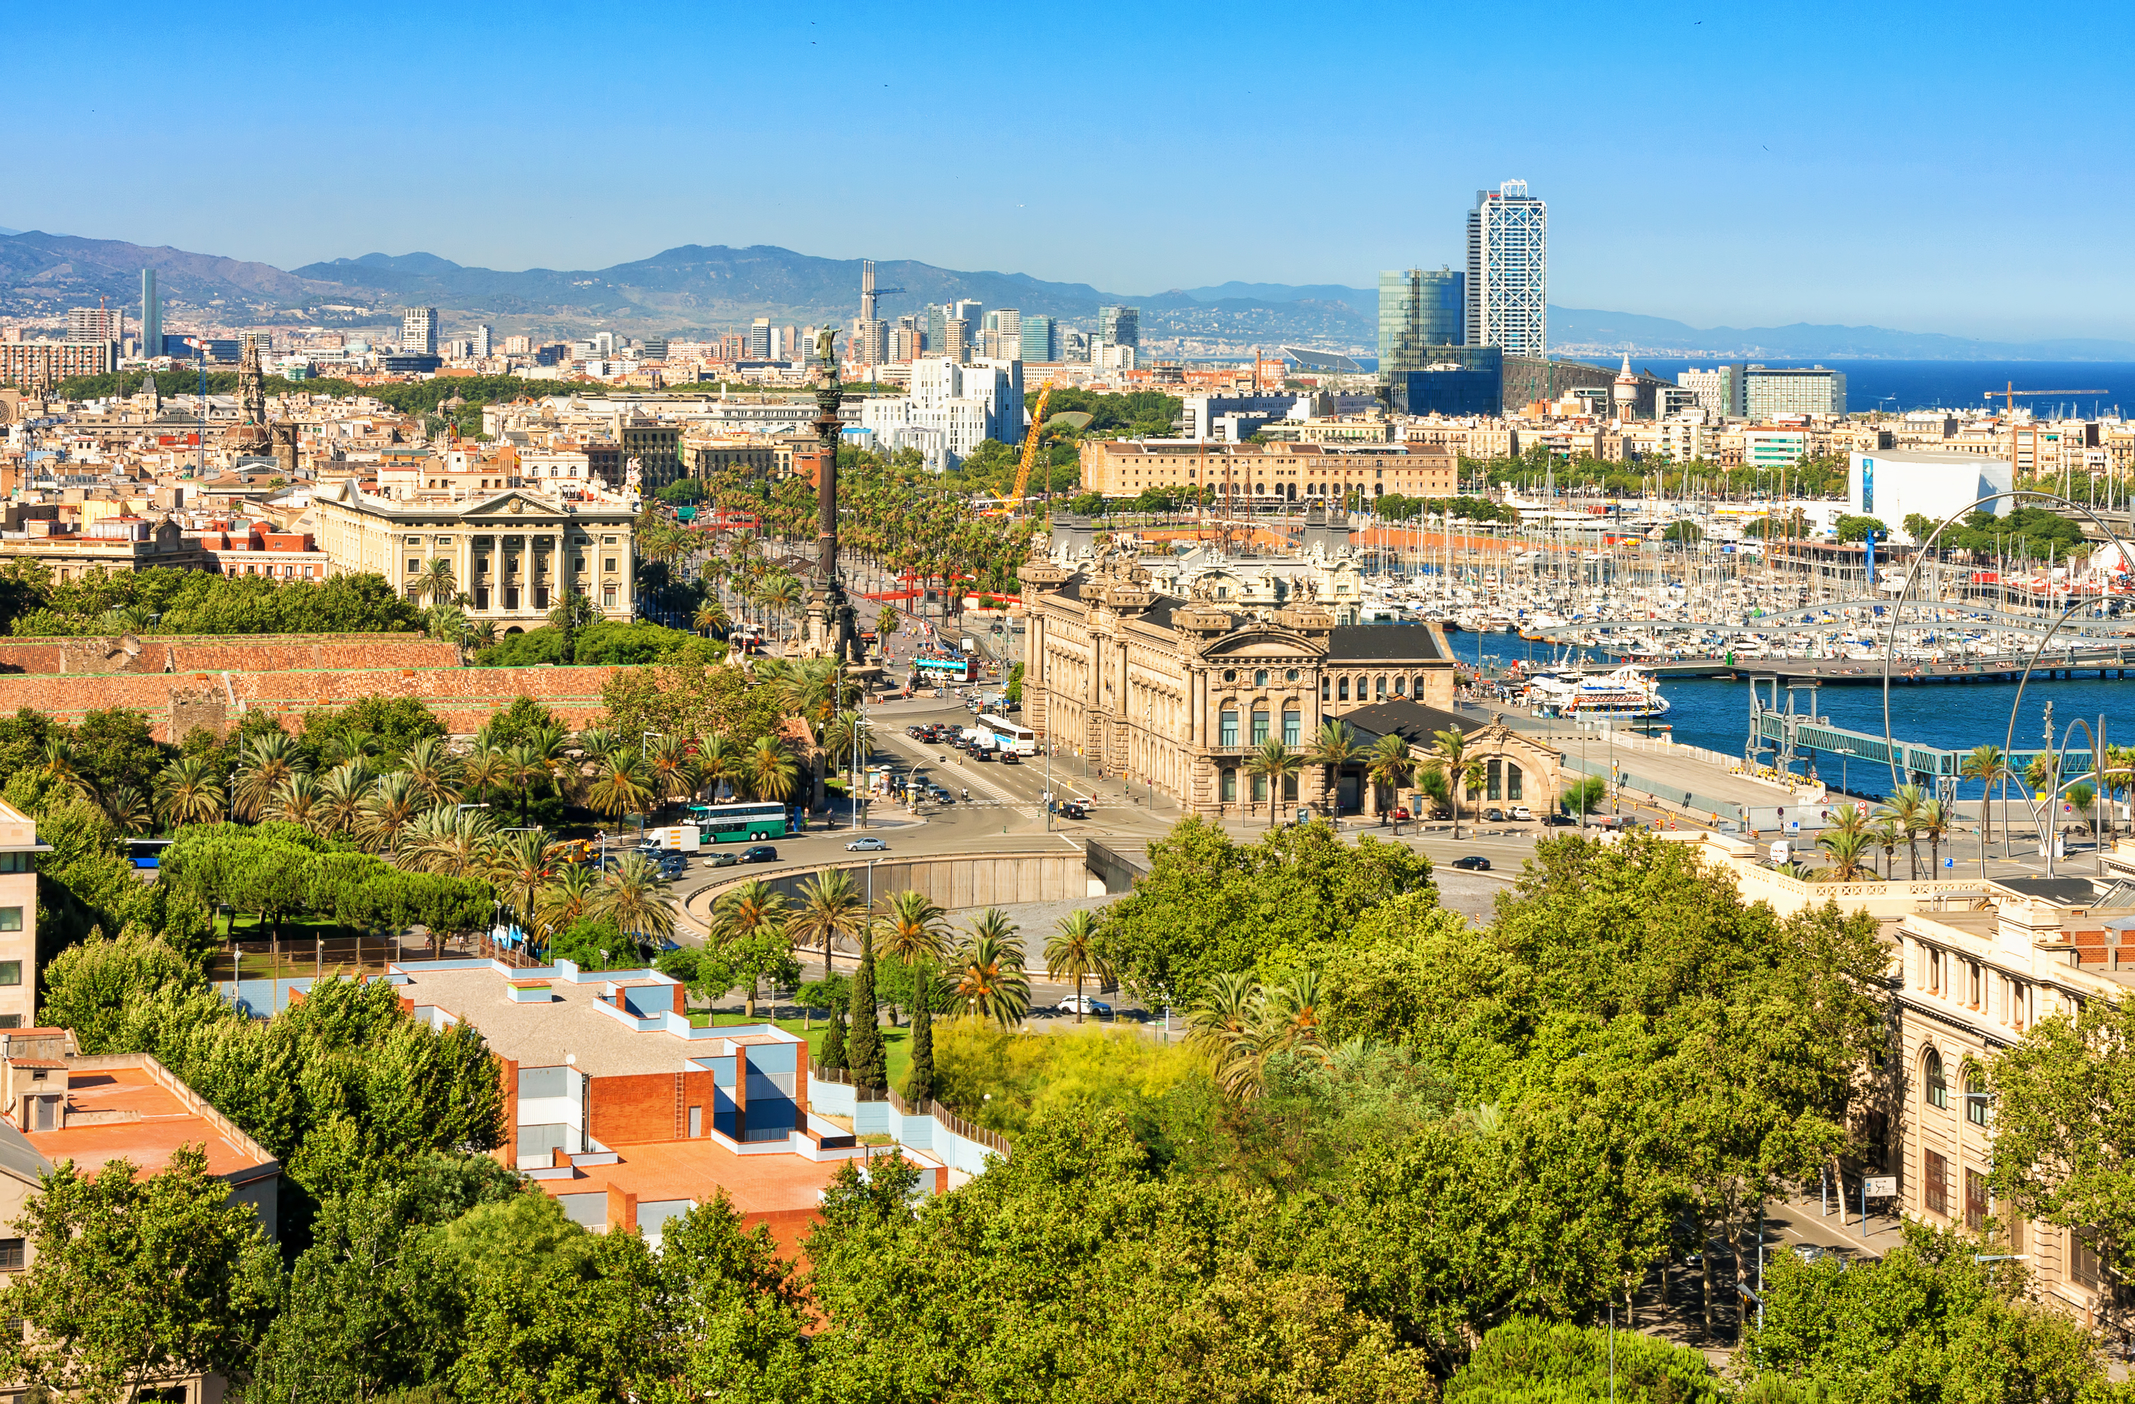 TAP Portugal sale: Flights to Europe from $379 round-trip